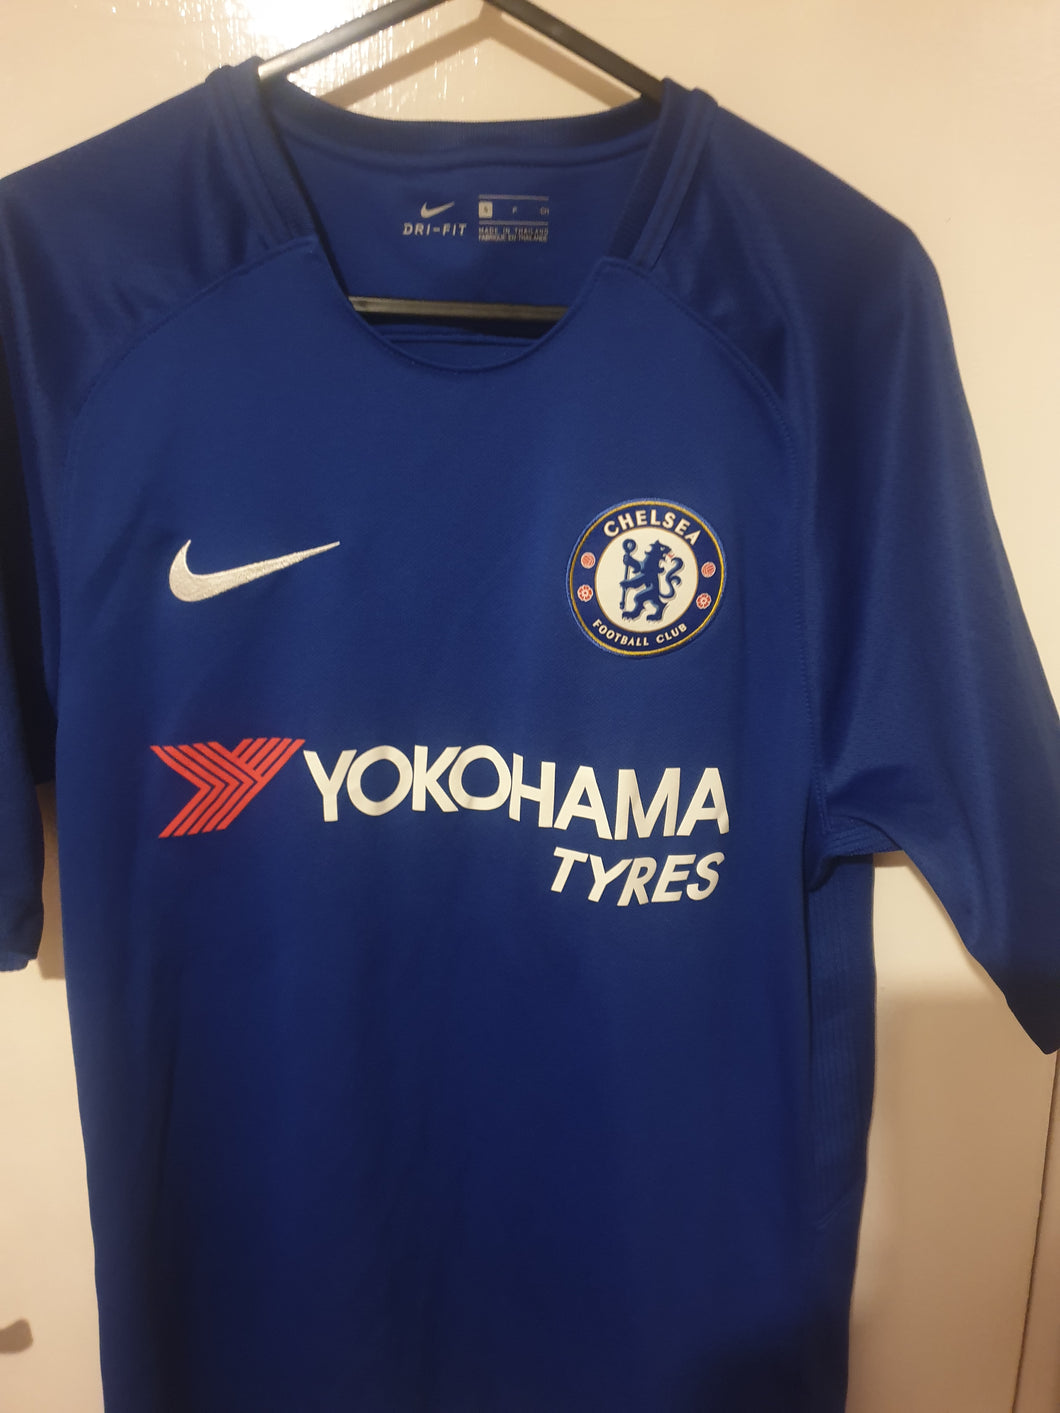 Chelsea Fc 2017-2018 Home Shirt (Size Small)